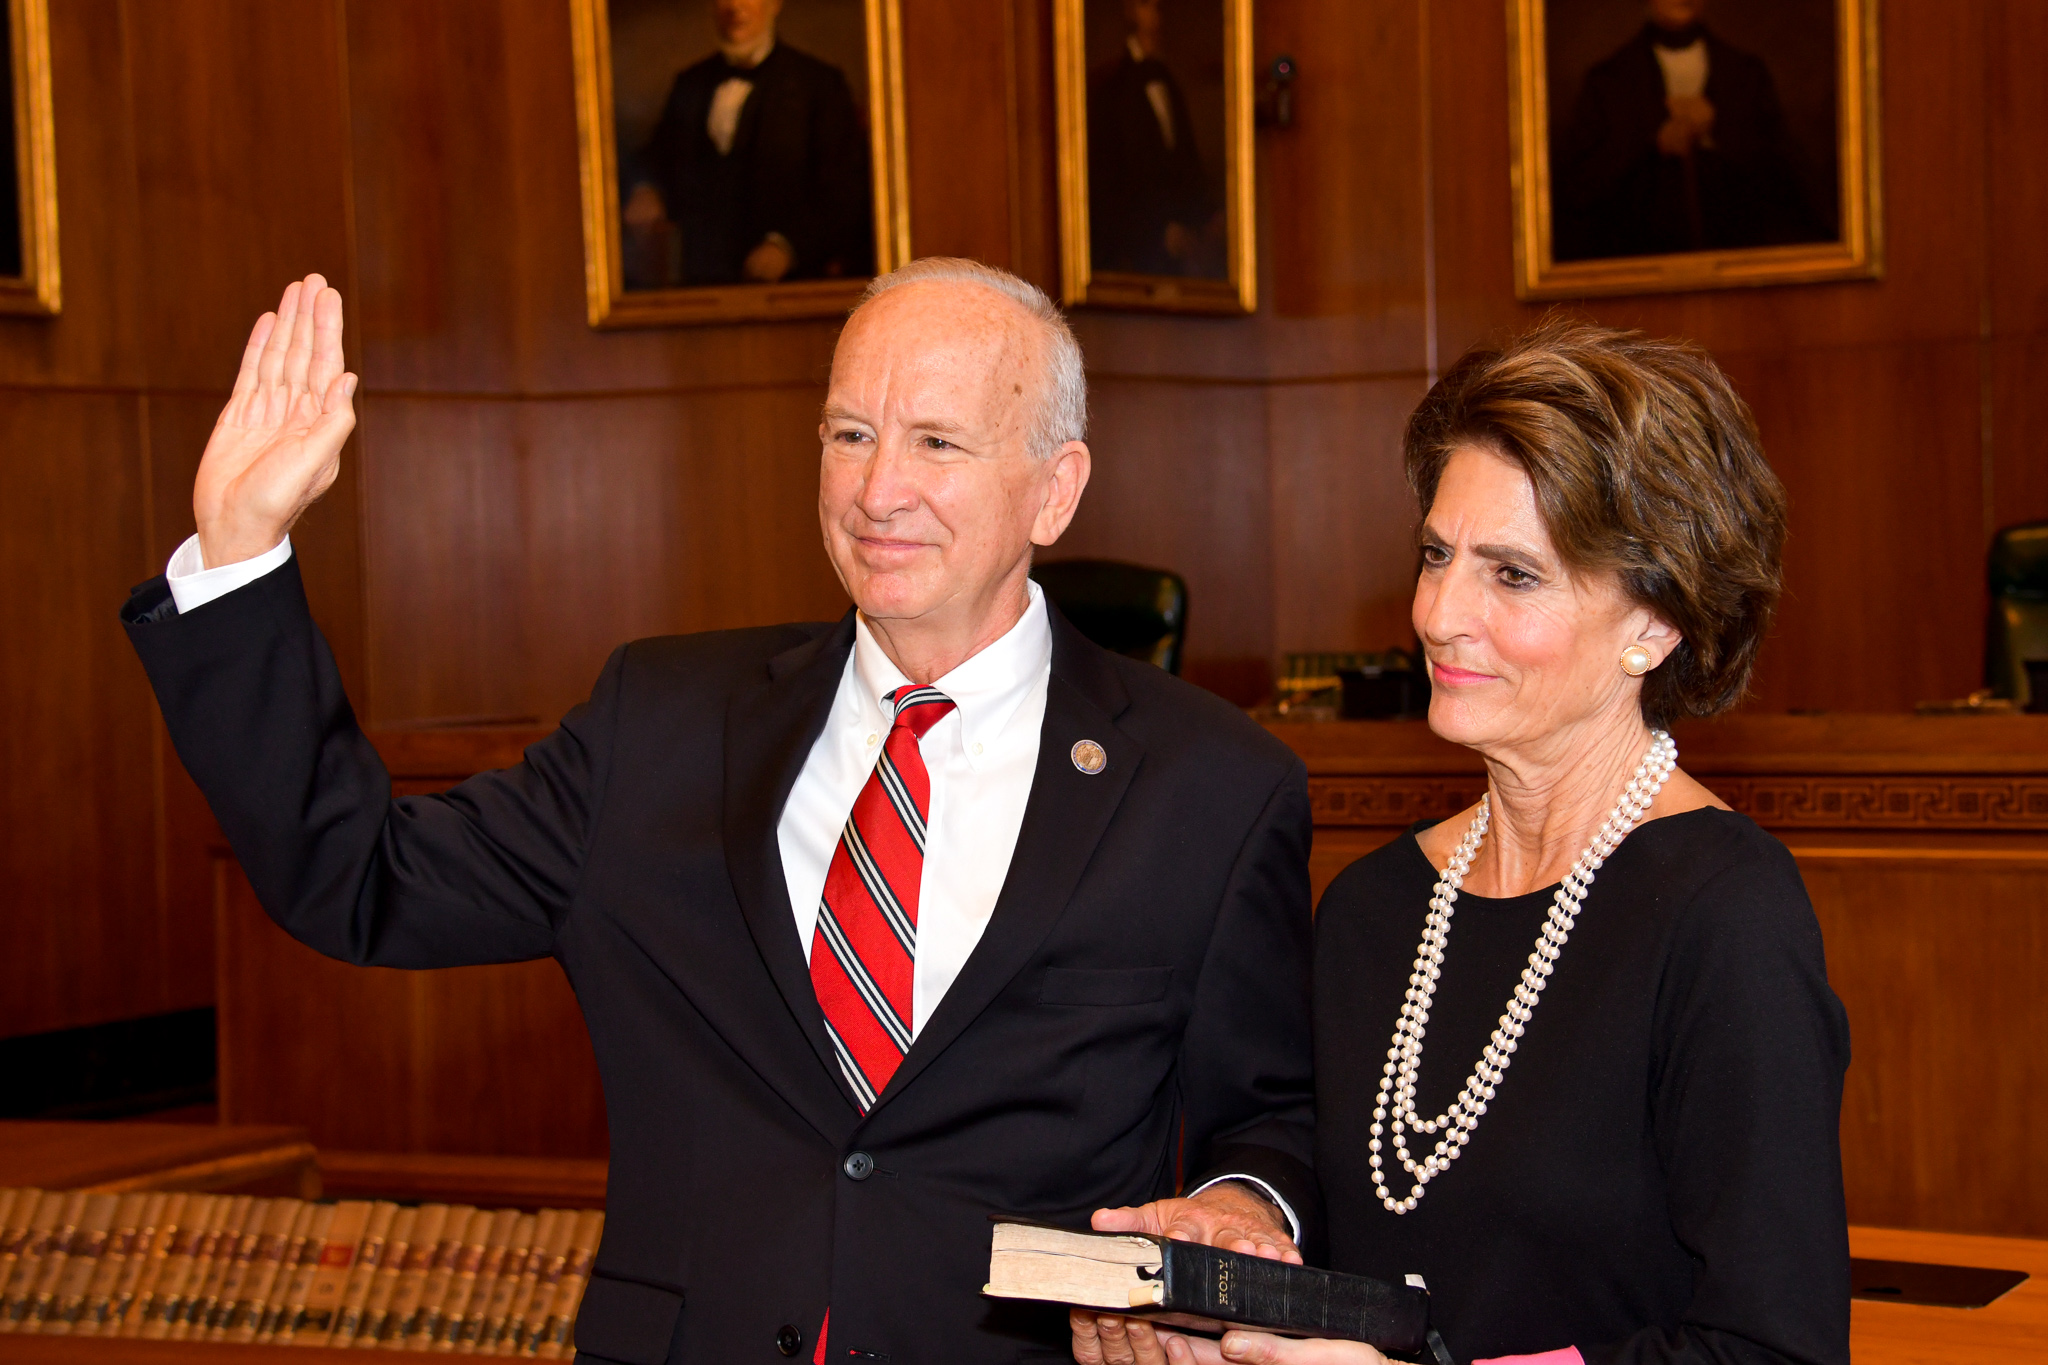 Chief Justice Paul Newby swearing-in ceremony